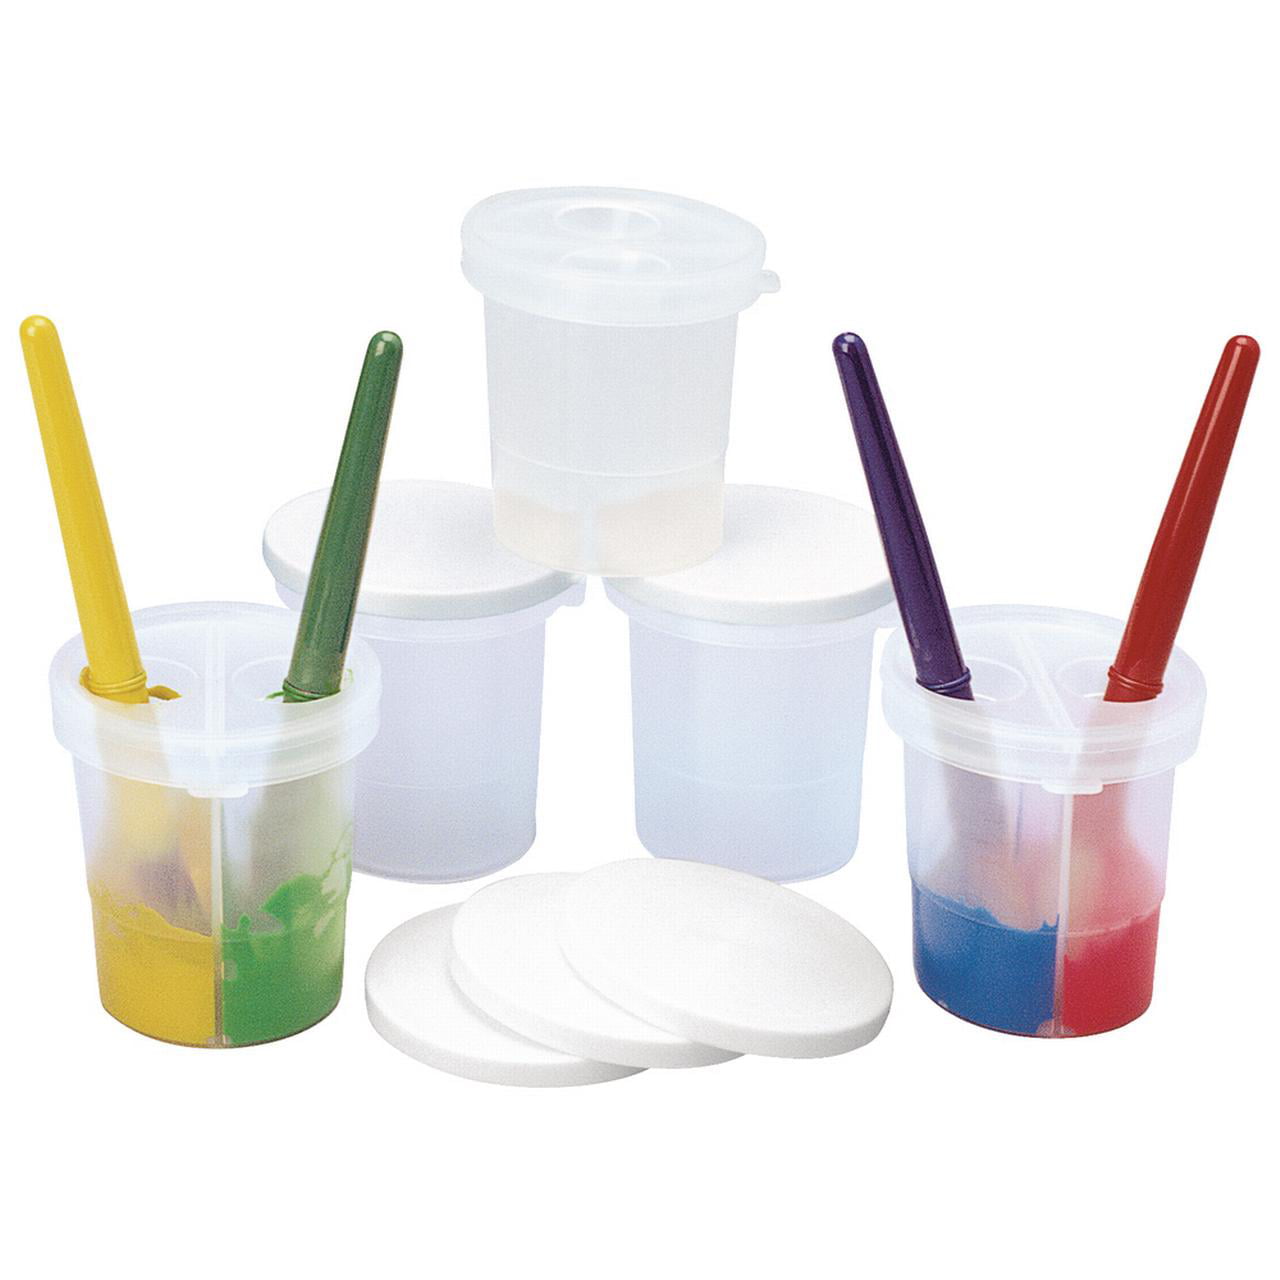 Children’s Art and Crafts Kit 5 Paint Pots and 10 Kids Paint Brushes edukit Spill Proof Paint Cups and Children’s Paint Brush Set